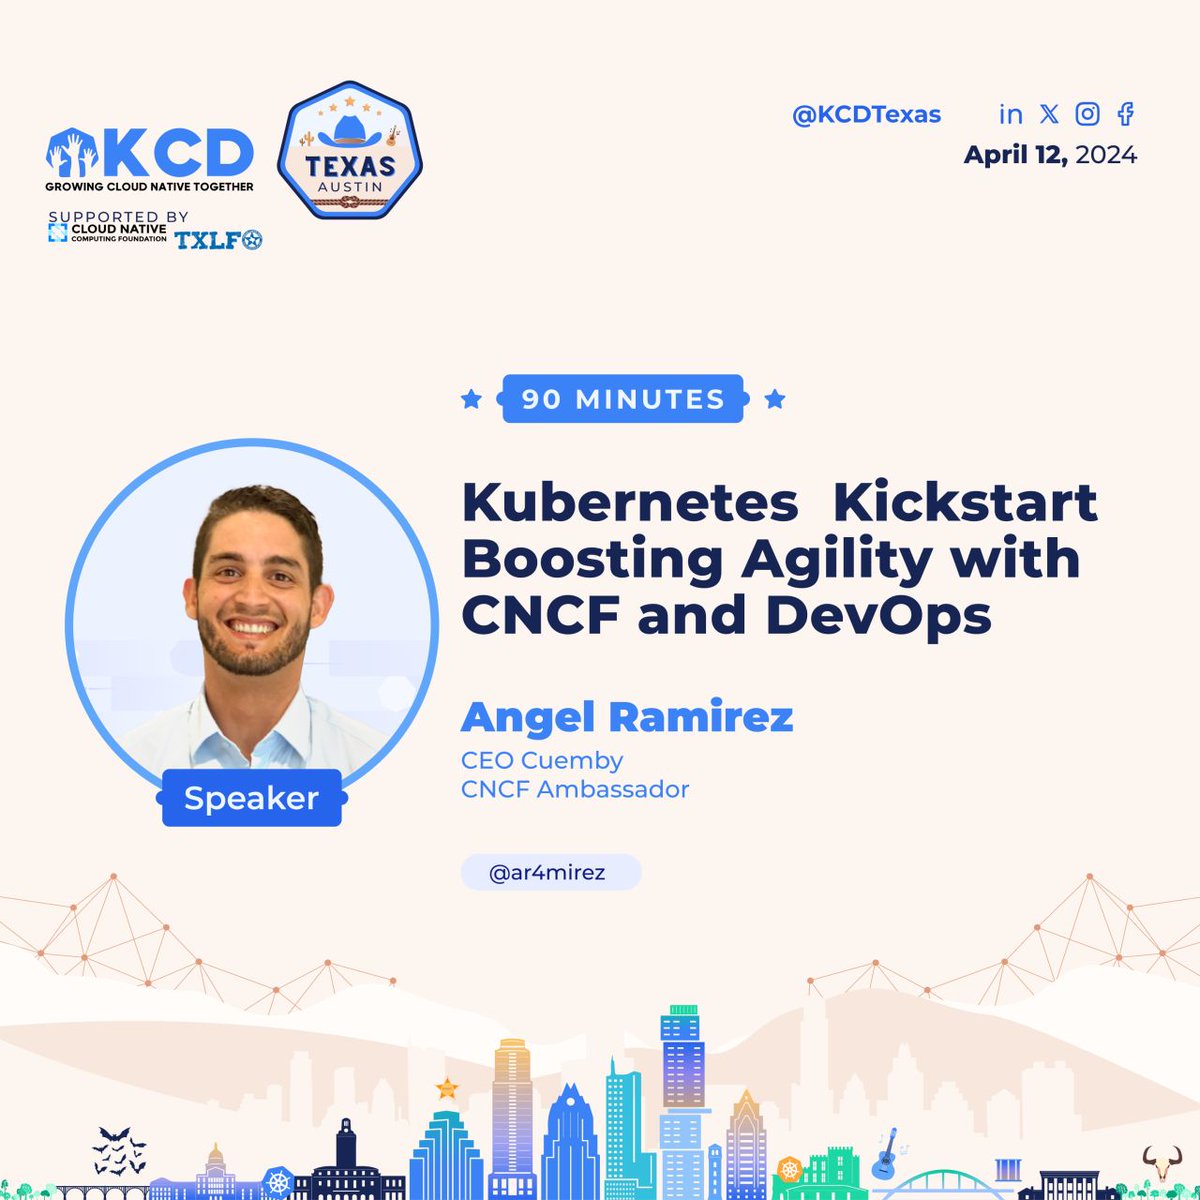 🚀 Kicking off @KCDTexas! Join our CEO @ar4mirez for his presentation: 'Kubernetes Kickstart: Boosting Agility with CNCF & DevOps.' Get practical with your first Kubernetes app deployment using CNCF tools! 🕒 15:00-16:30, Room 5. Don't miss out! #Kubernetes #DevOps #KCDTexas